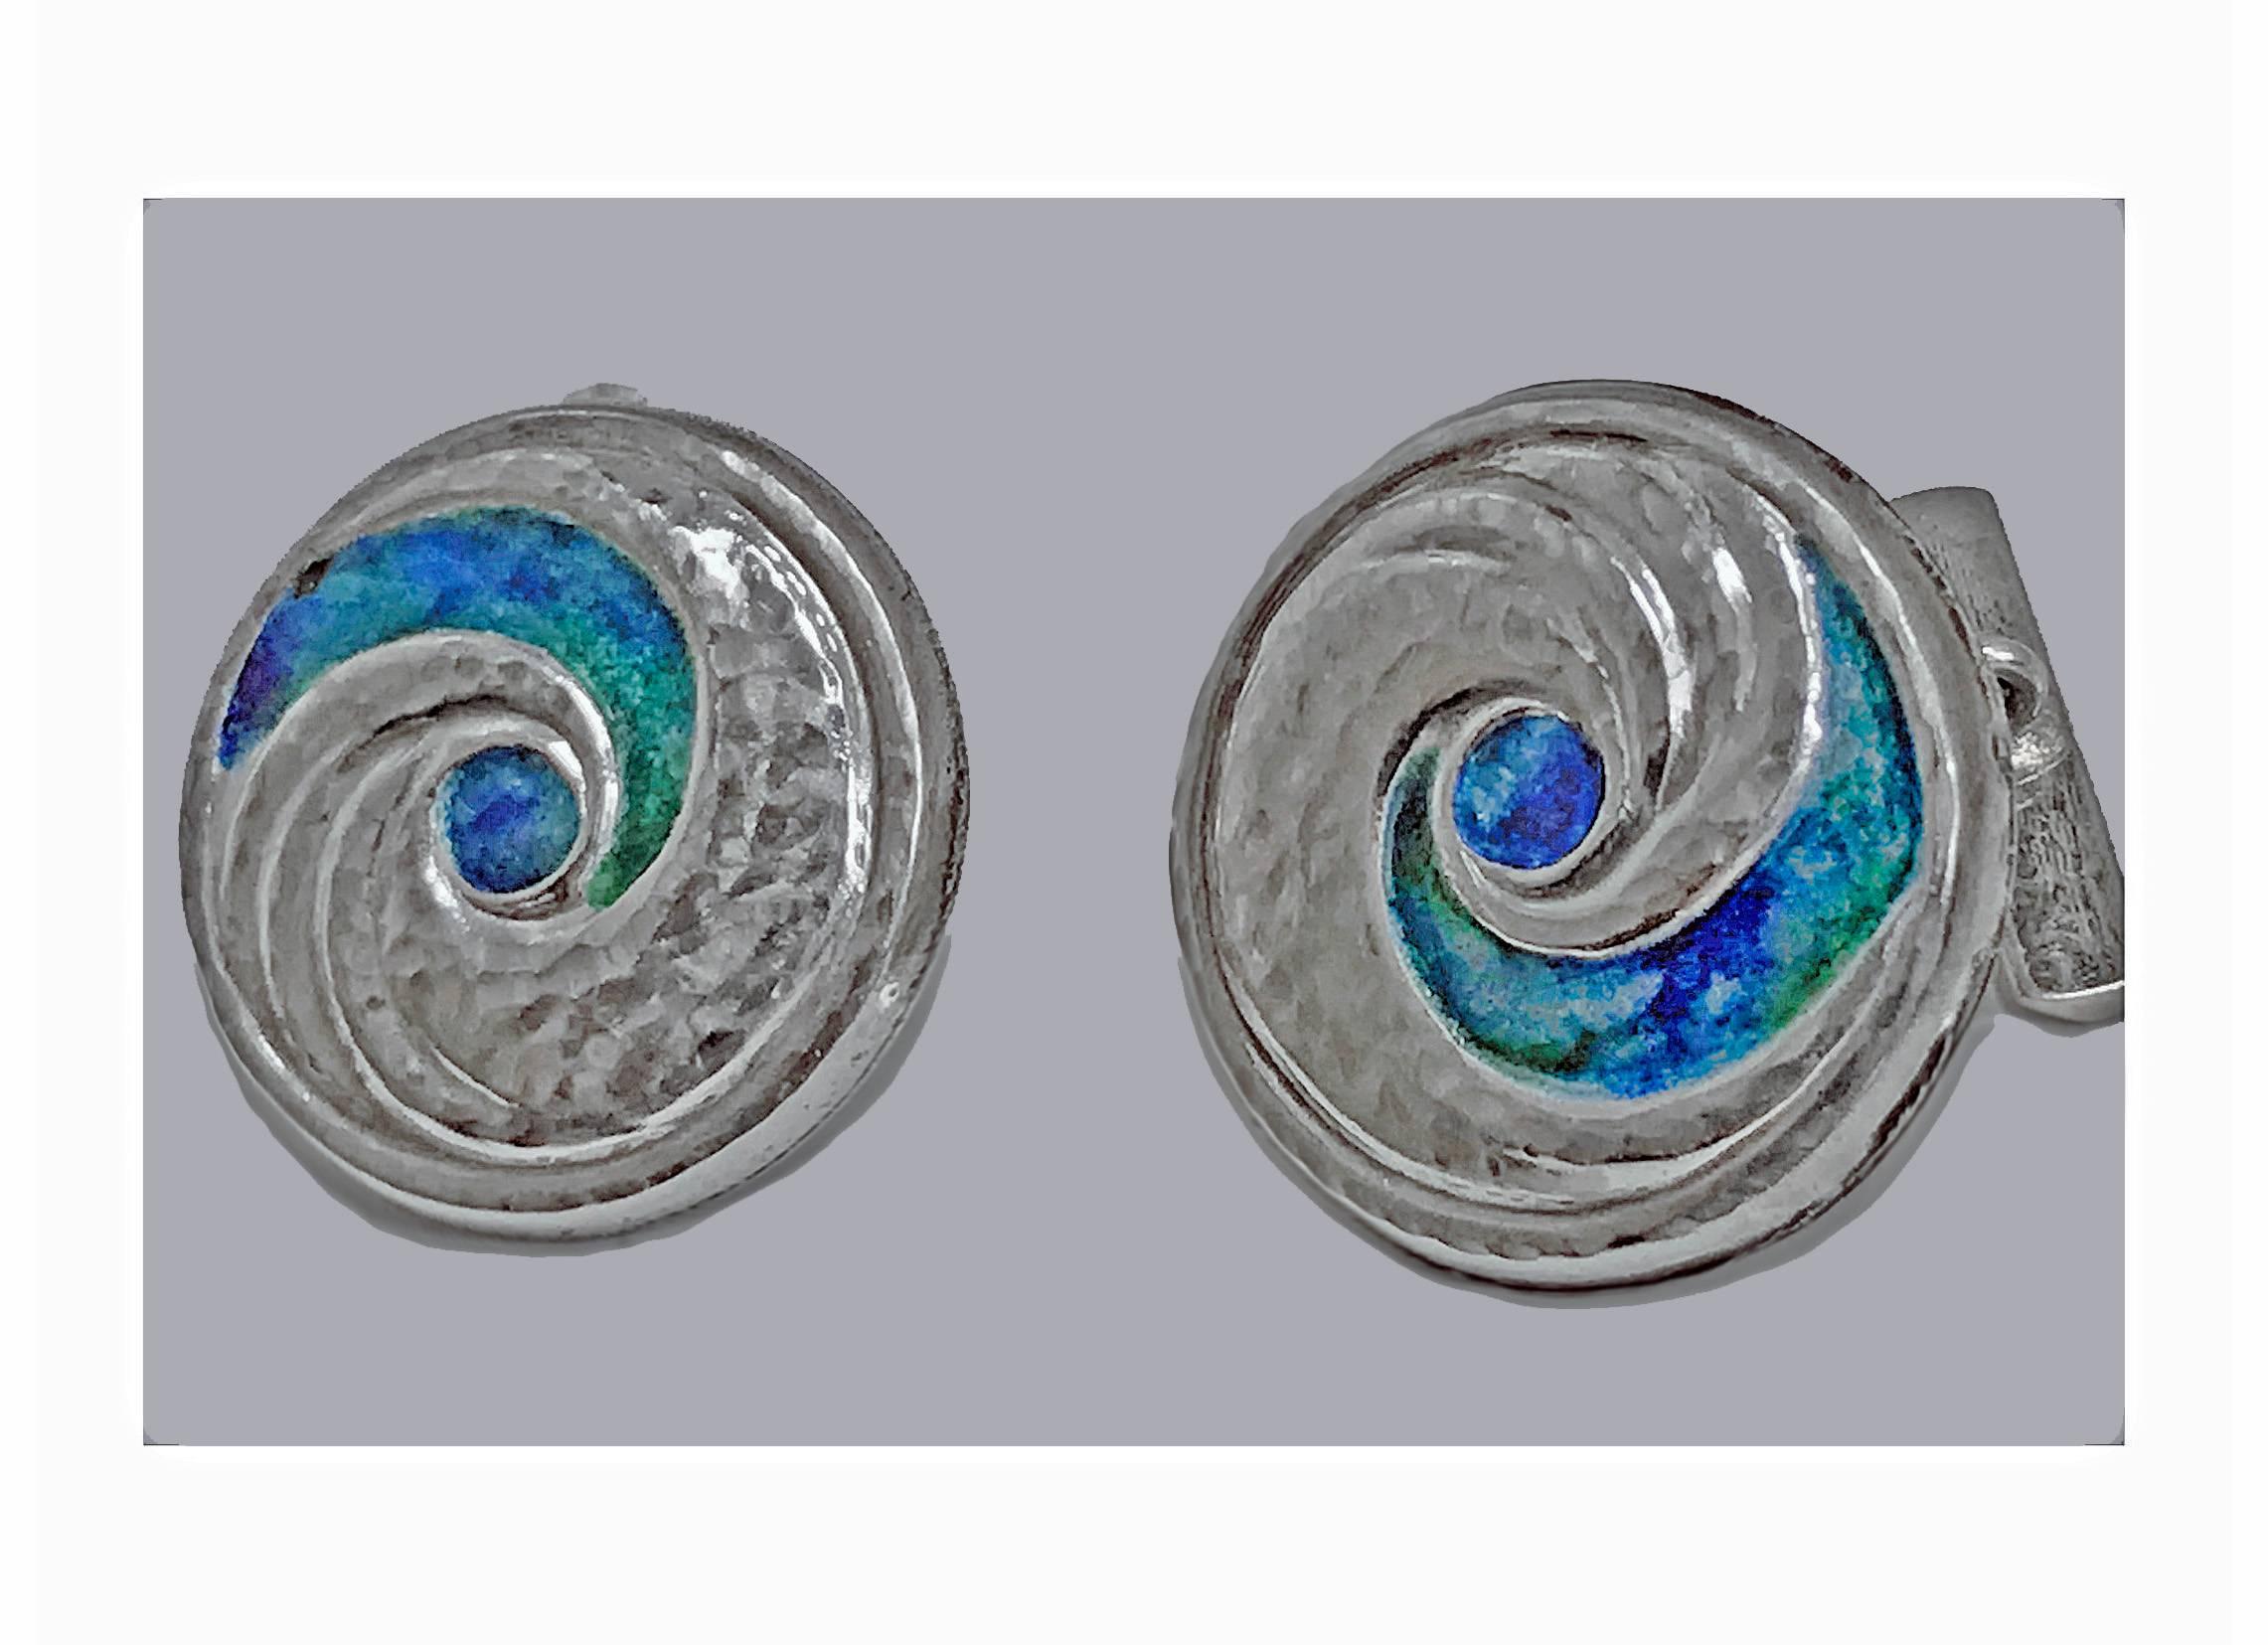 Pair of Liberty & Co Archibald Knox designed enamel cufflinks, Birmingham 1902-4. The circular slightly concave cufflinks with swirl hammered silver and green, blue, turquoise enamel. Chain and hemi rectangular bar fitments. Full Liberty marks to